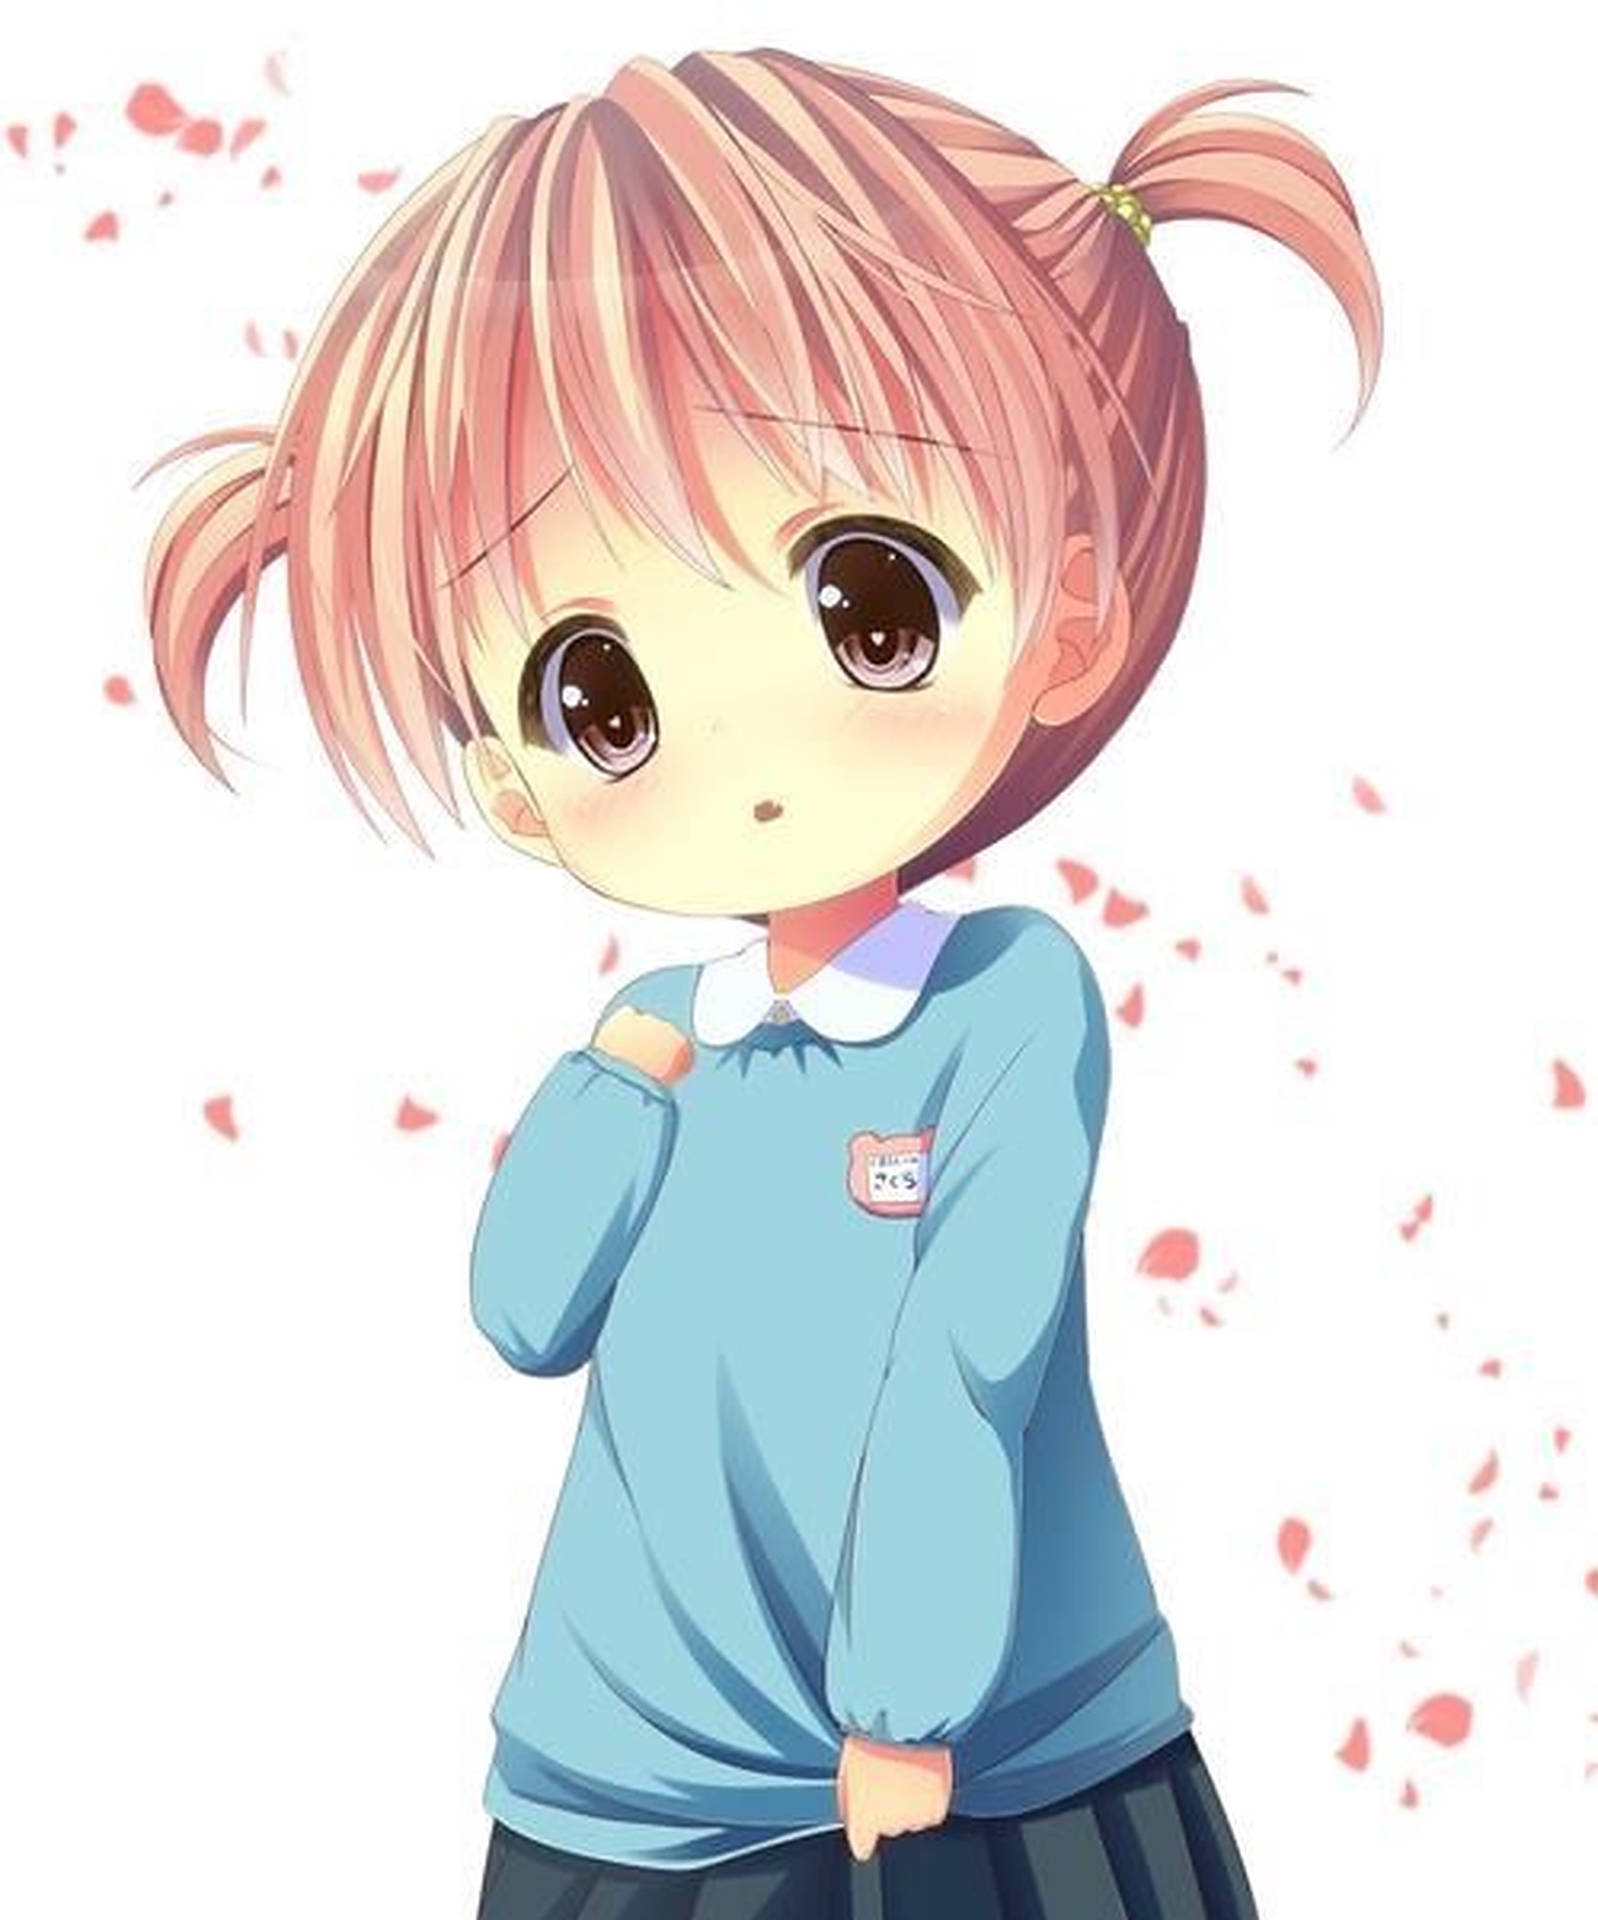 Anime Kid With Pink Hair